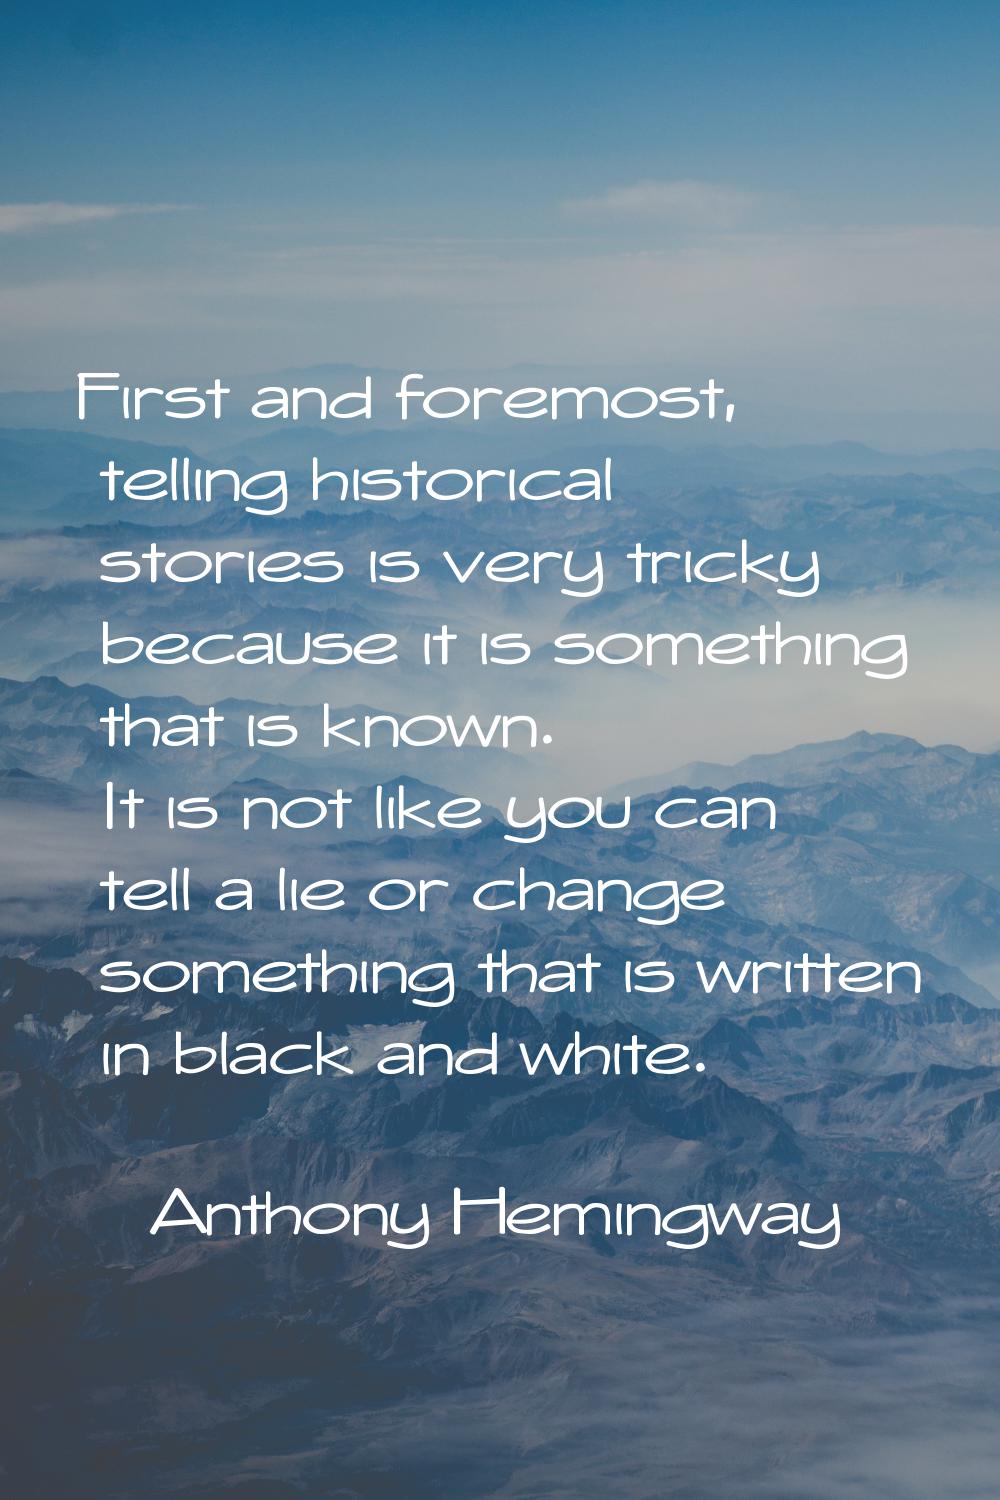 First and foremost, telling historical stories is very tricky because it is something that is known